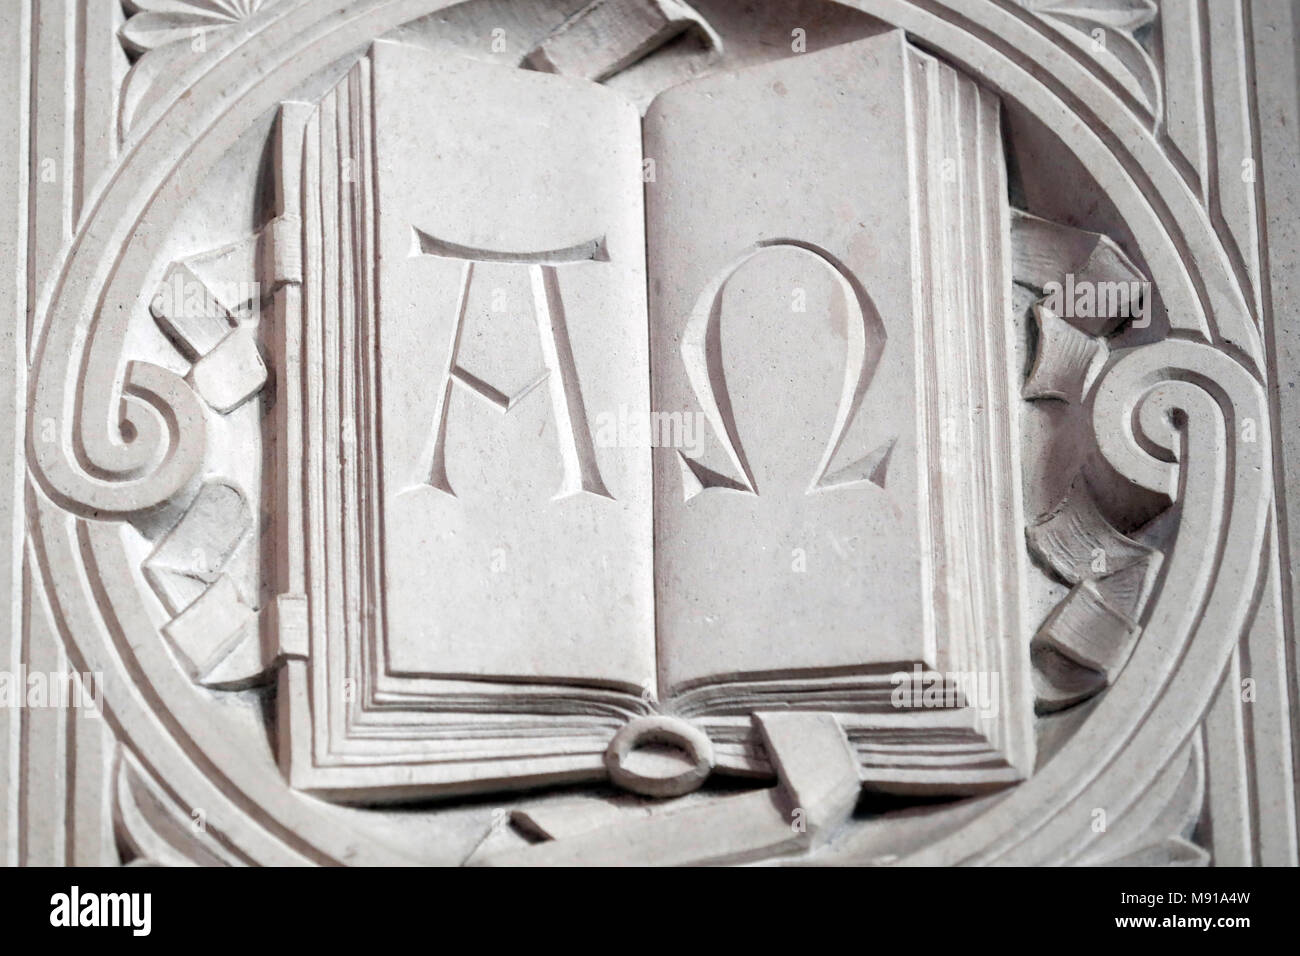 The Temple Neuf protestant church.  The Greek letters alpha and omega as christian symbols.  Strasbourg. France. Stock Photo